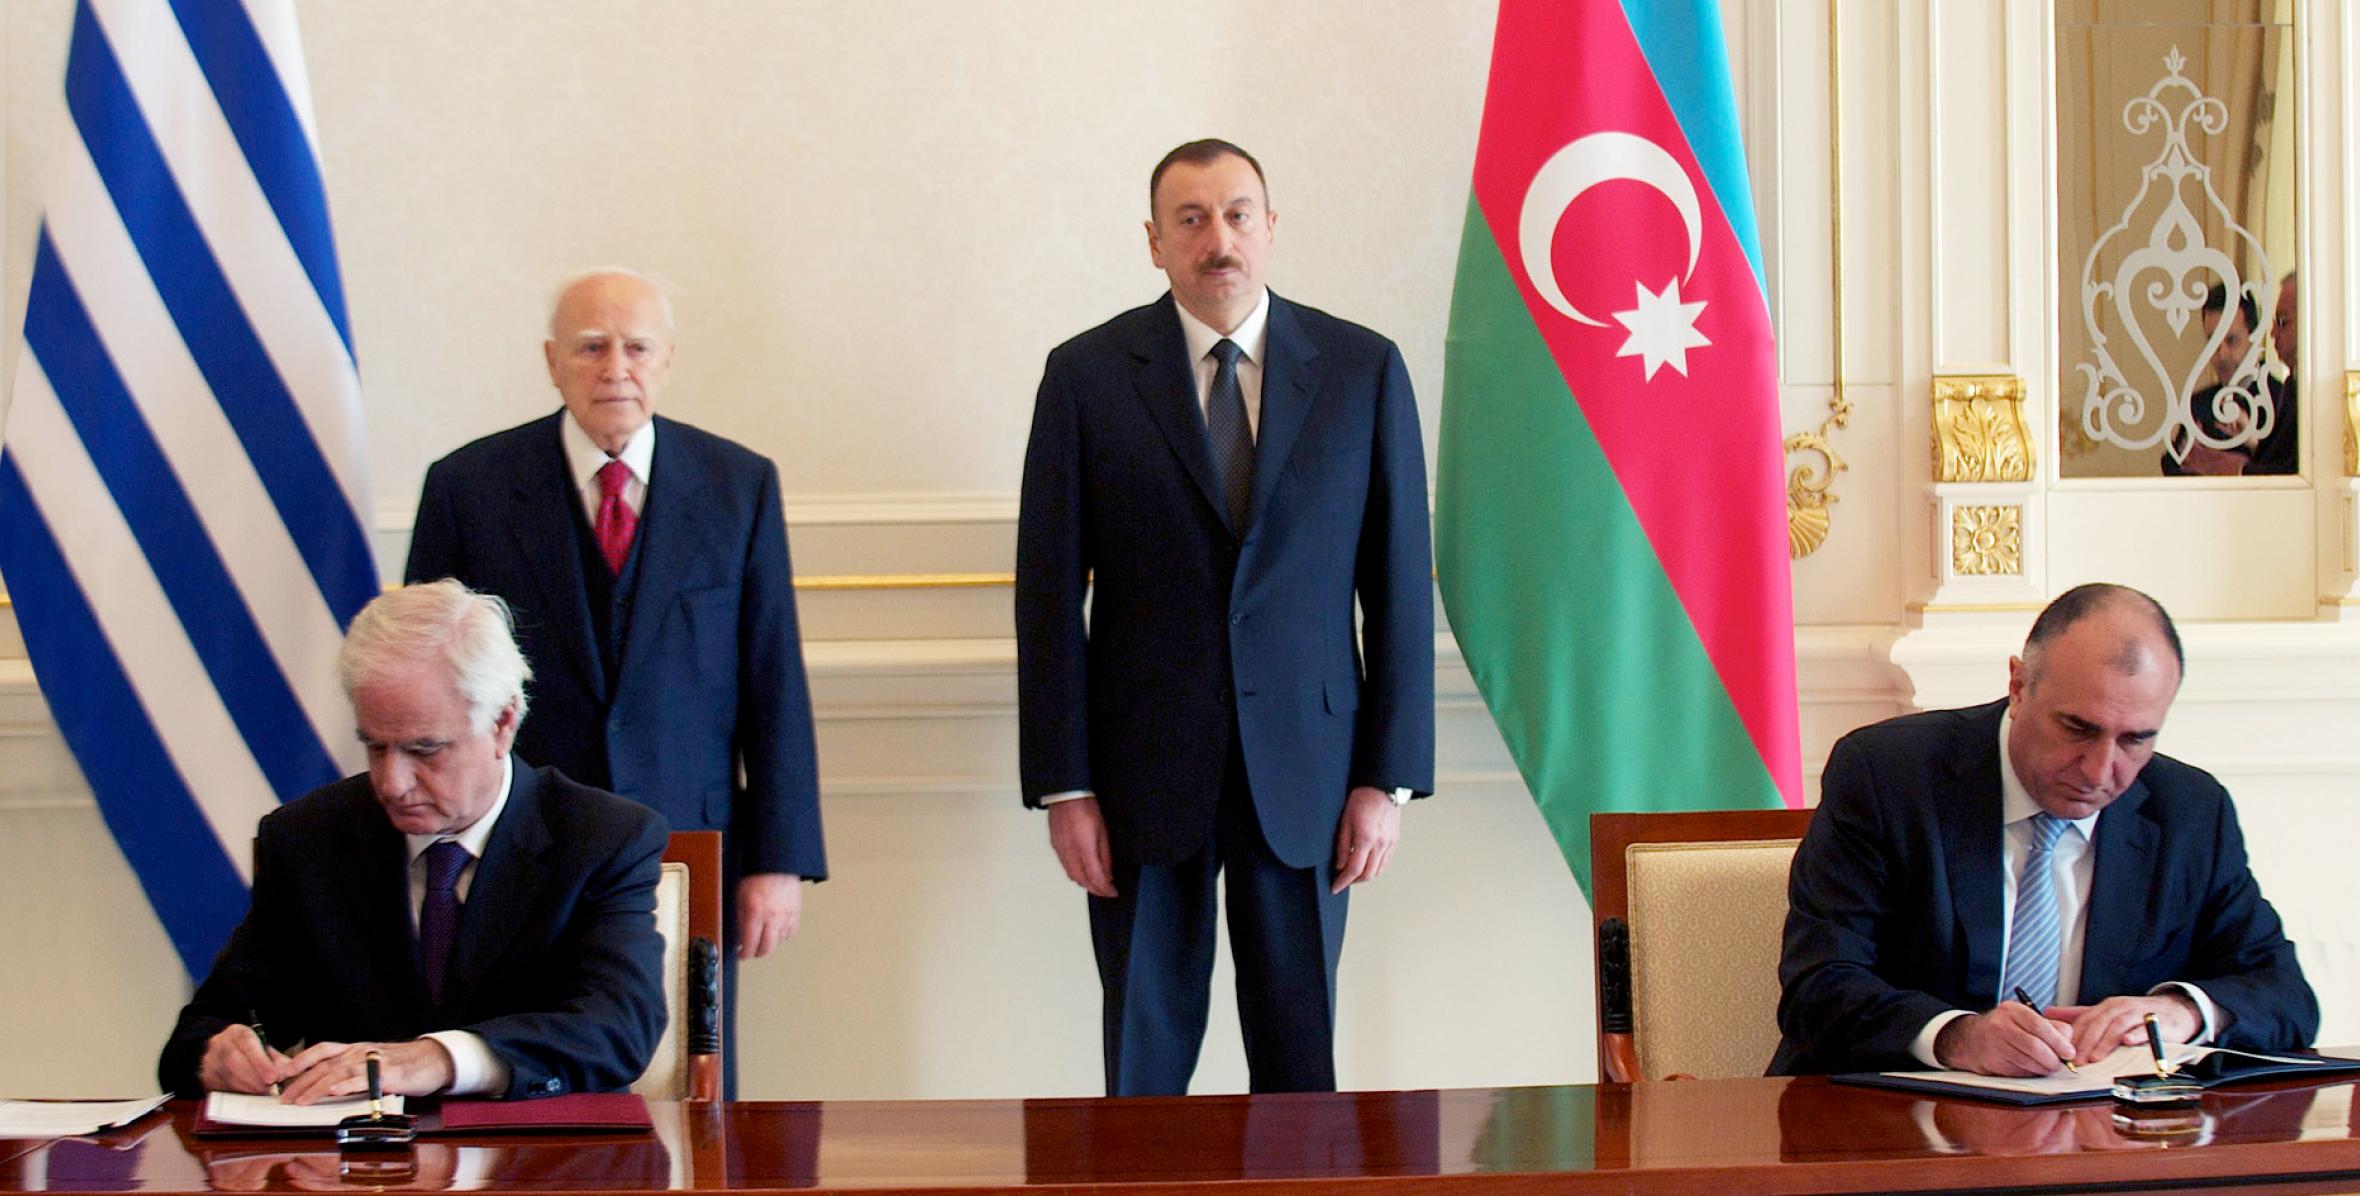 Ceremony of signing of Azerbaijani-Greek documents was held